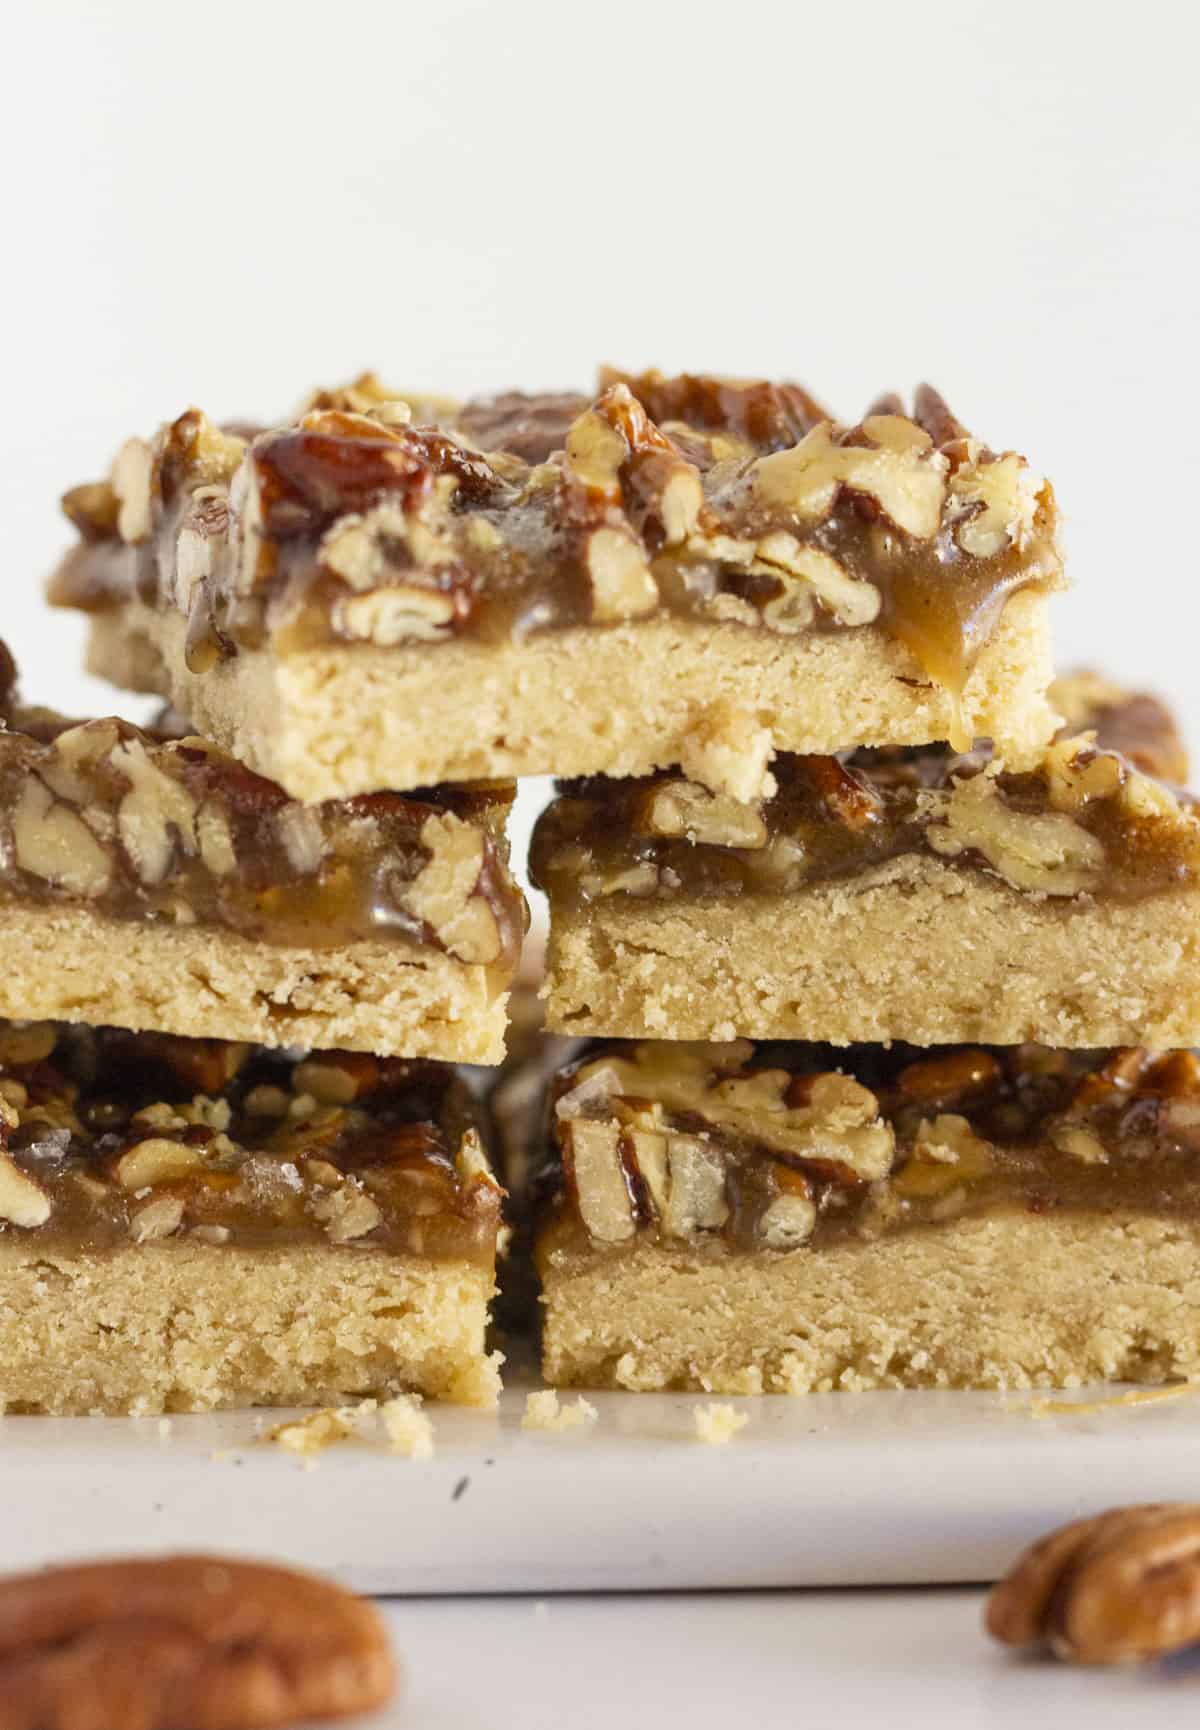 Baked pecan shortbread bars on a white plate for serving.